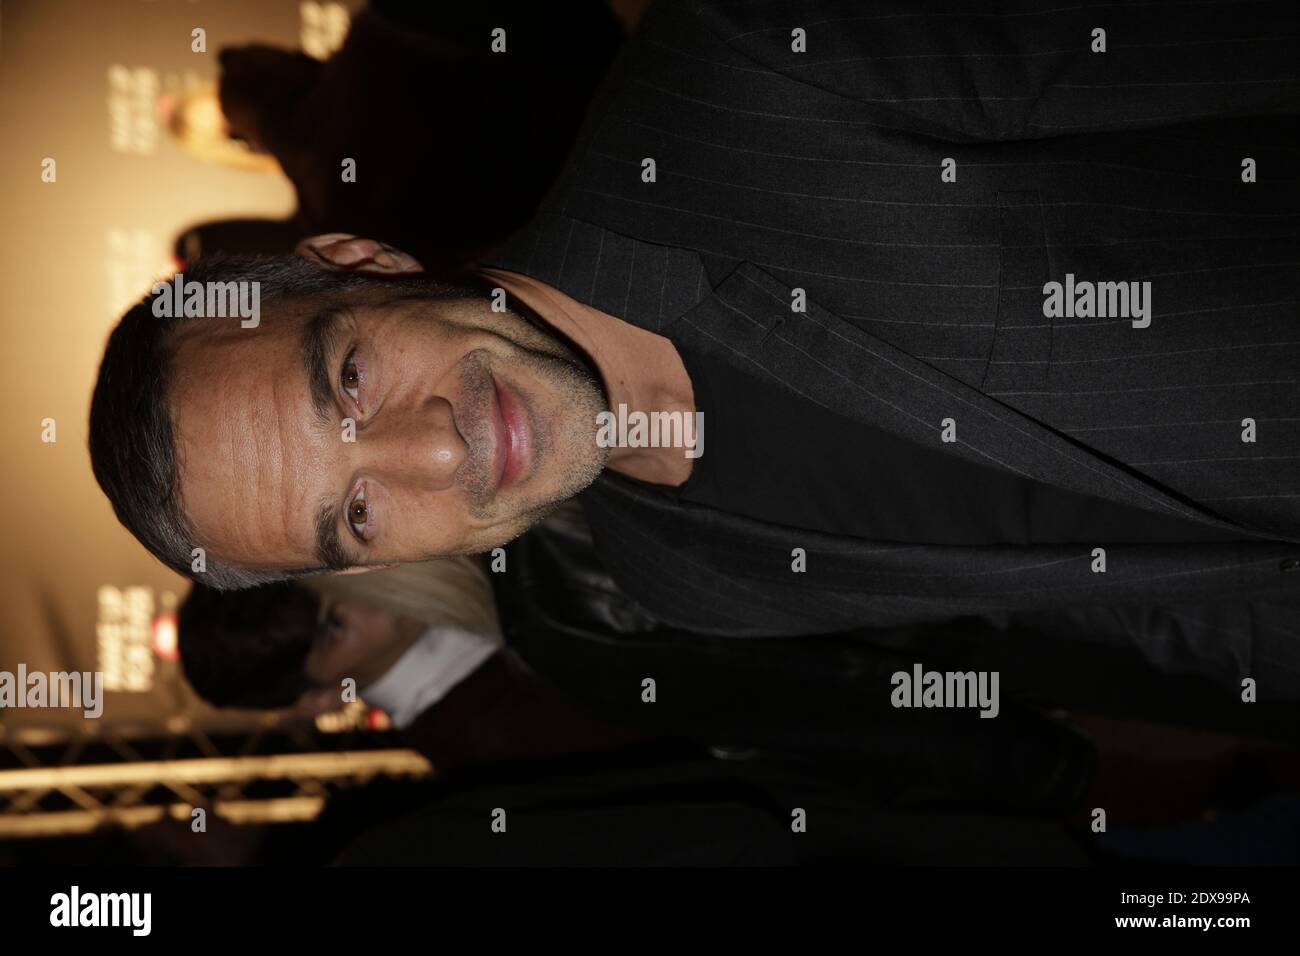 Philippe Le Bas attending the 'Make Up For Ever' Party at Yoyo in Paris, France on September 24, 2014. Photo by Jerome Domine/ABACAPRESS.COM Stock Photo